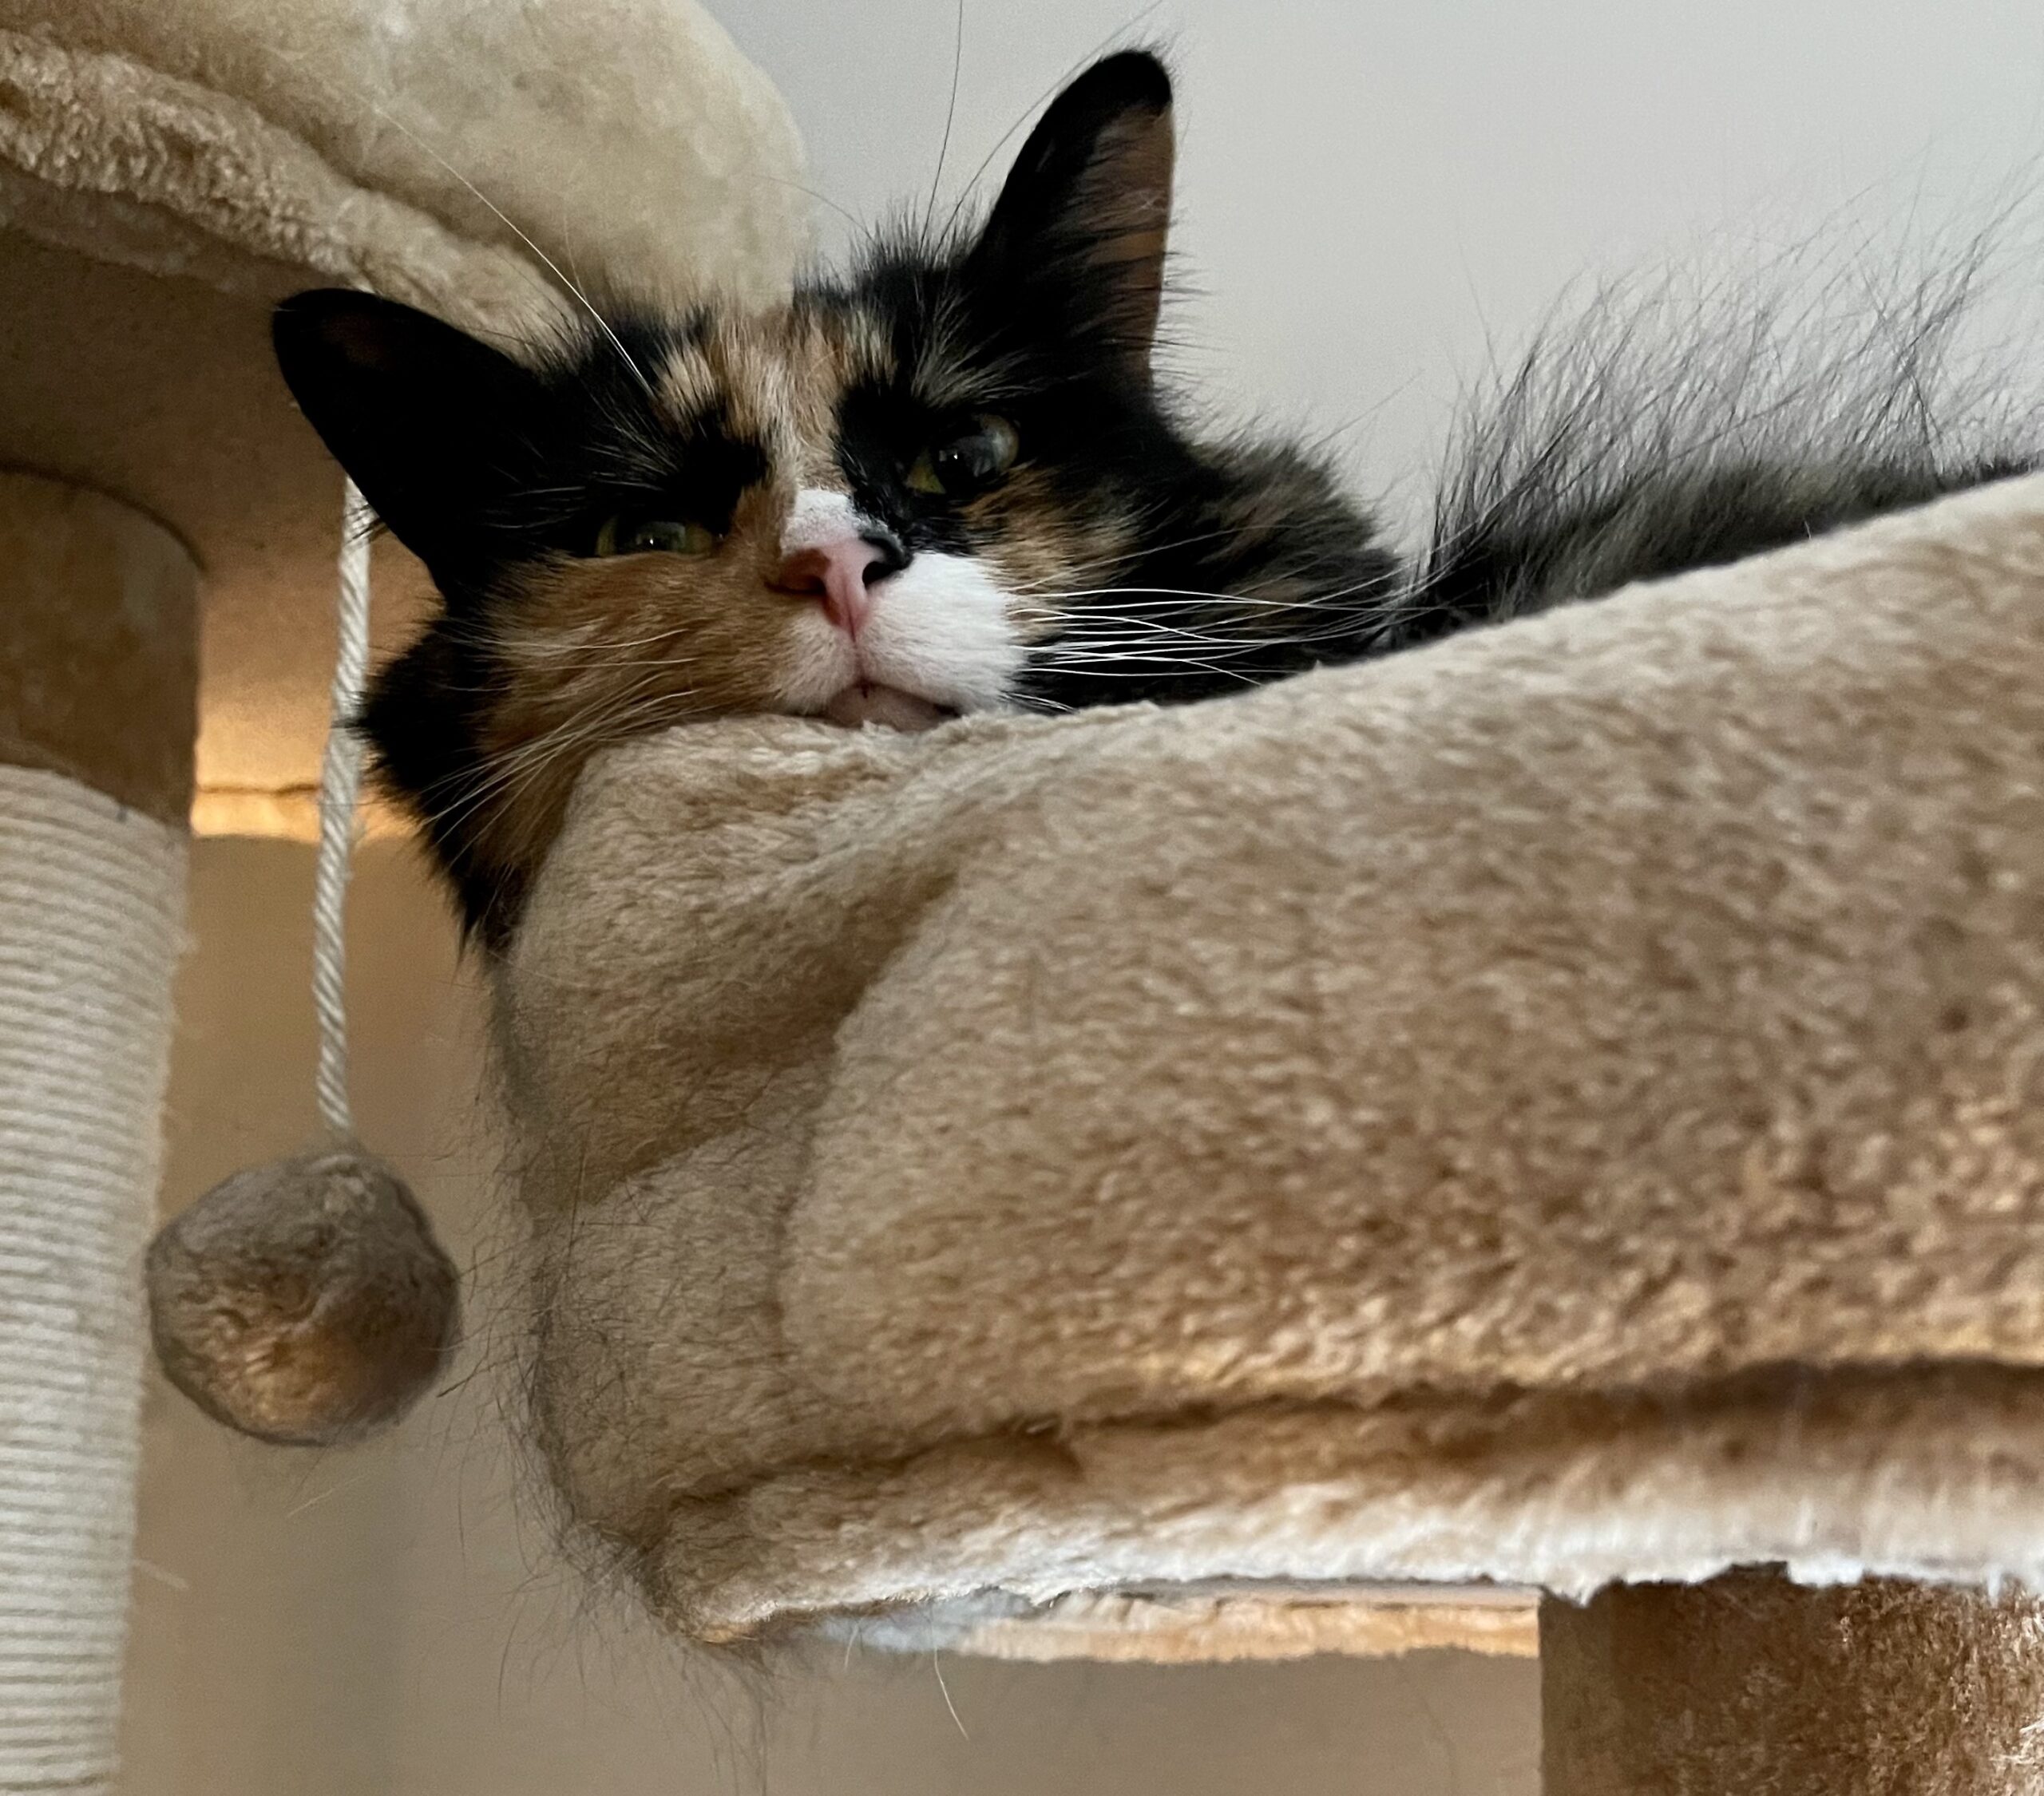 https://www.askamanager.org/wp-content/uploads/2022/07/Olive-in-cat-tree-scaled.jpeg